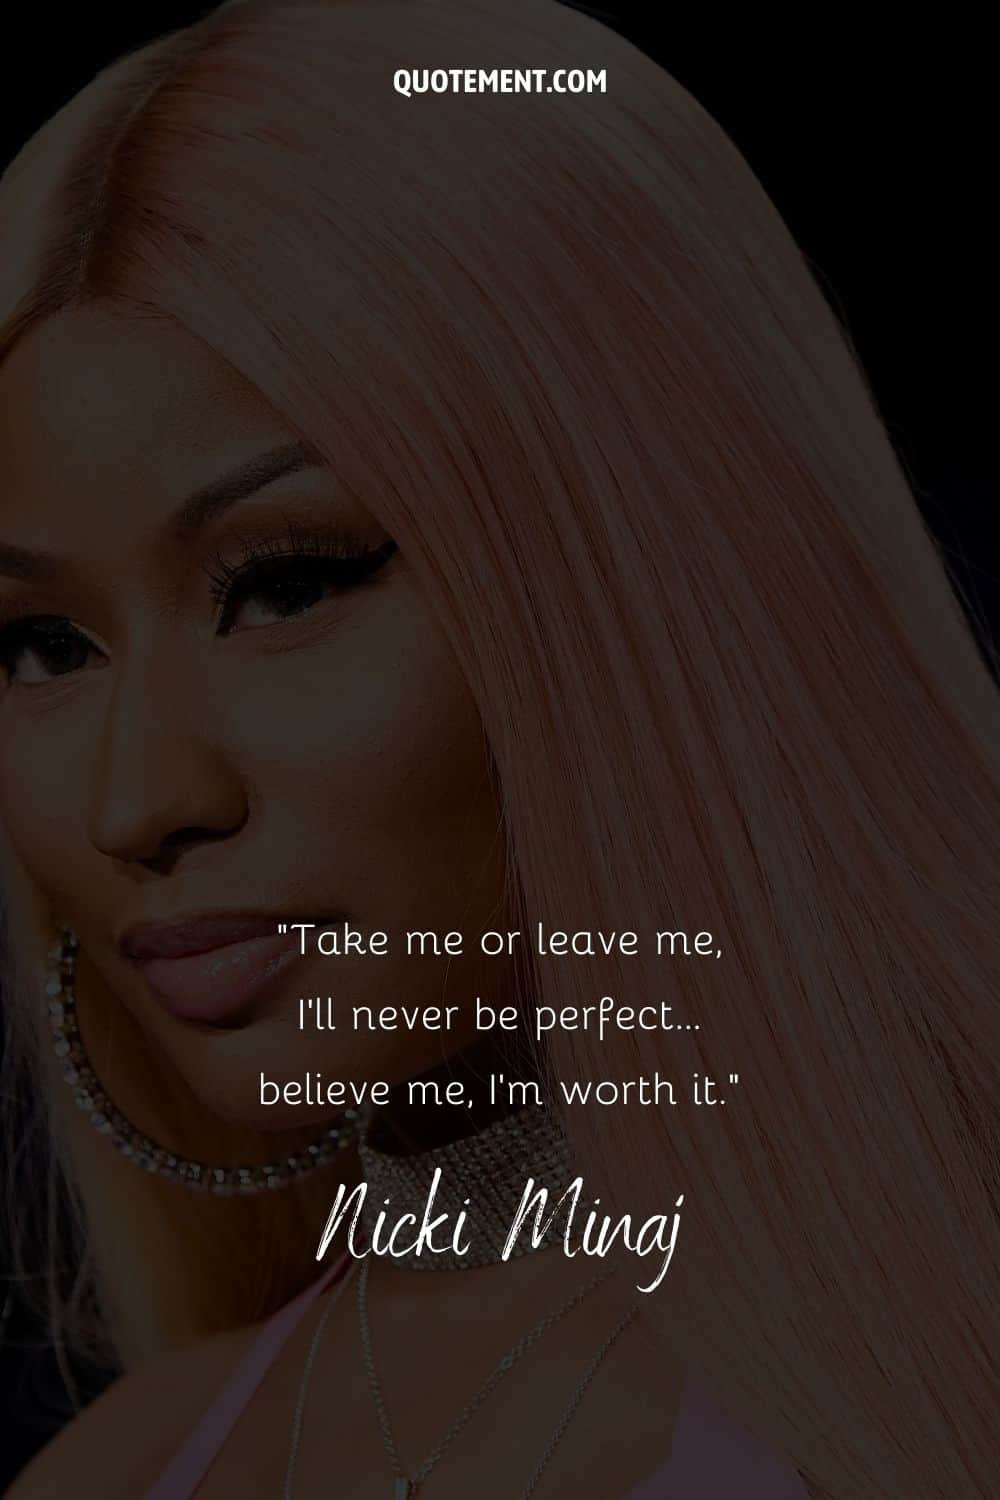 Sassy quote by the rapper Nicki Minaj and her photo in the background, too